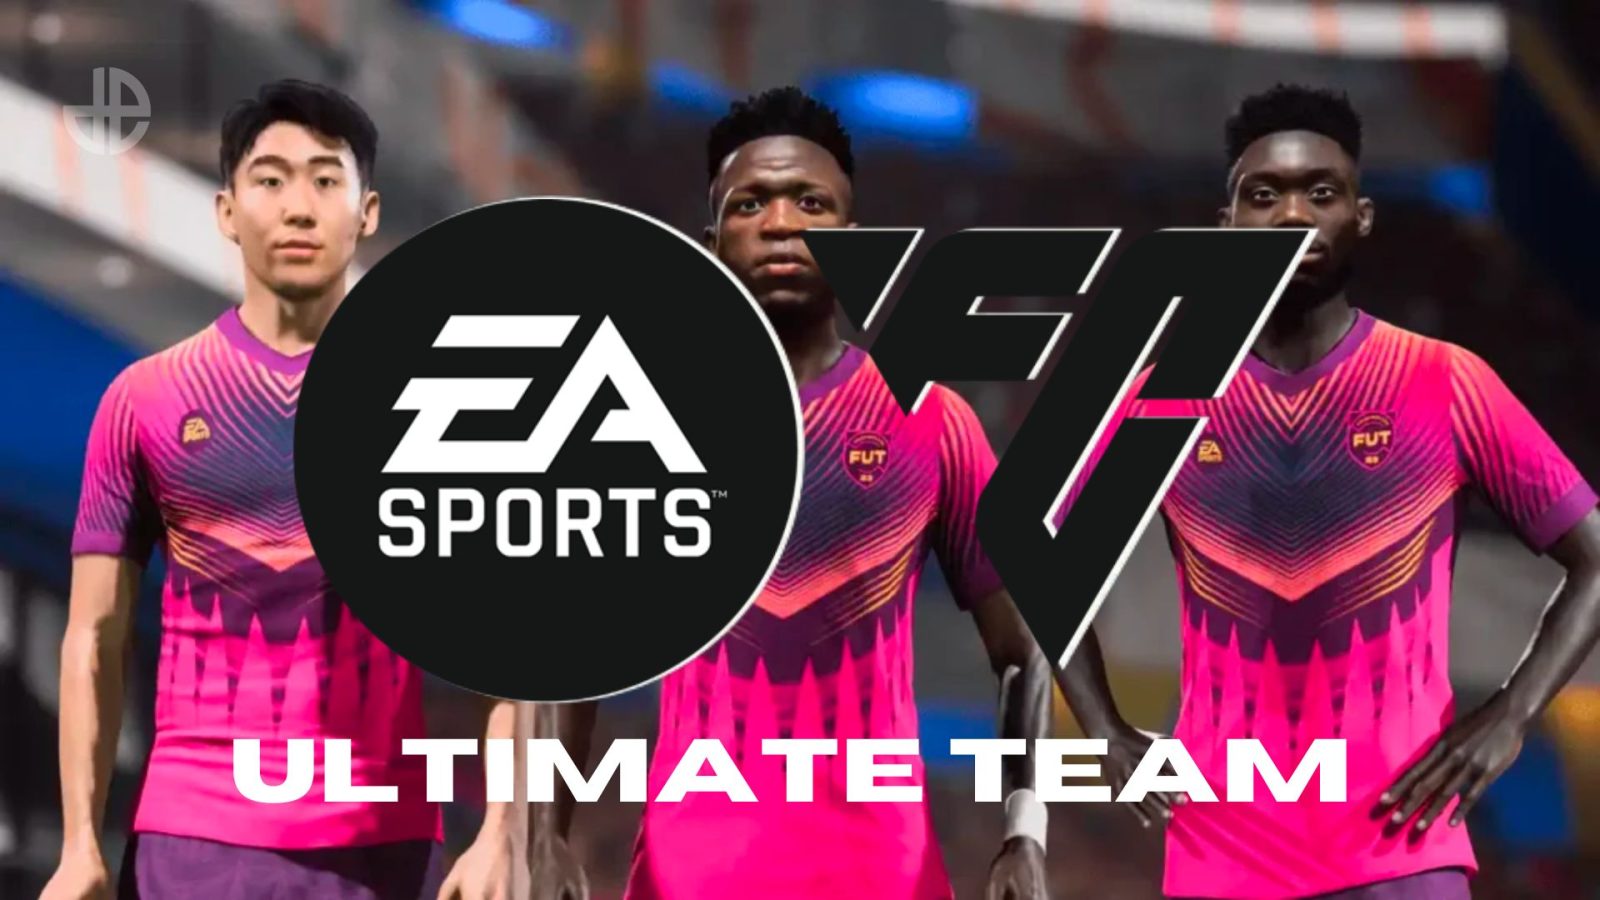 EA FC 24: All teams, licenses, leagues & stadiums on the game - Dexerto